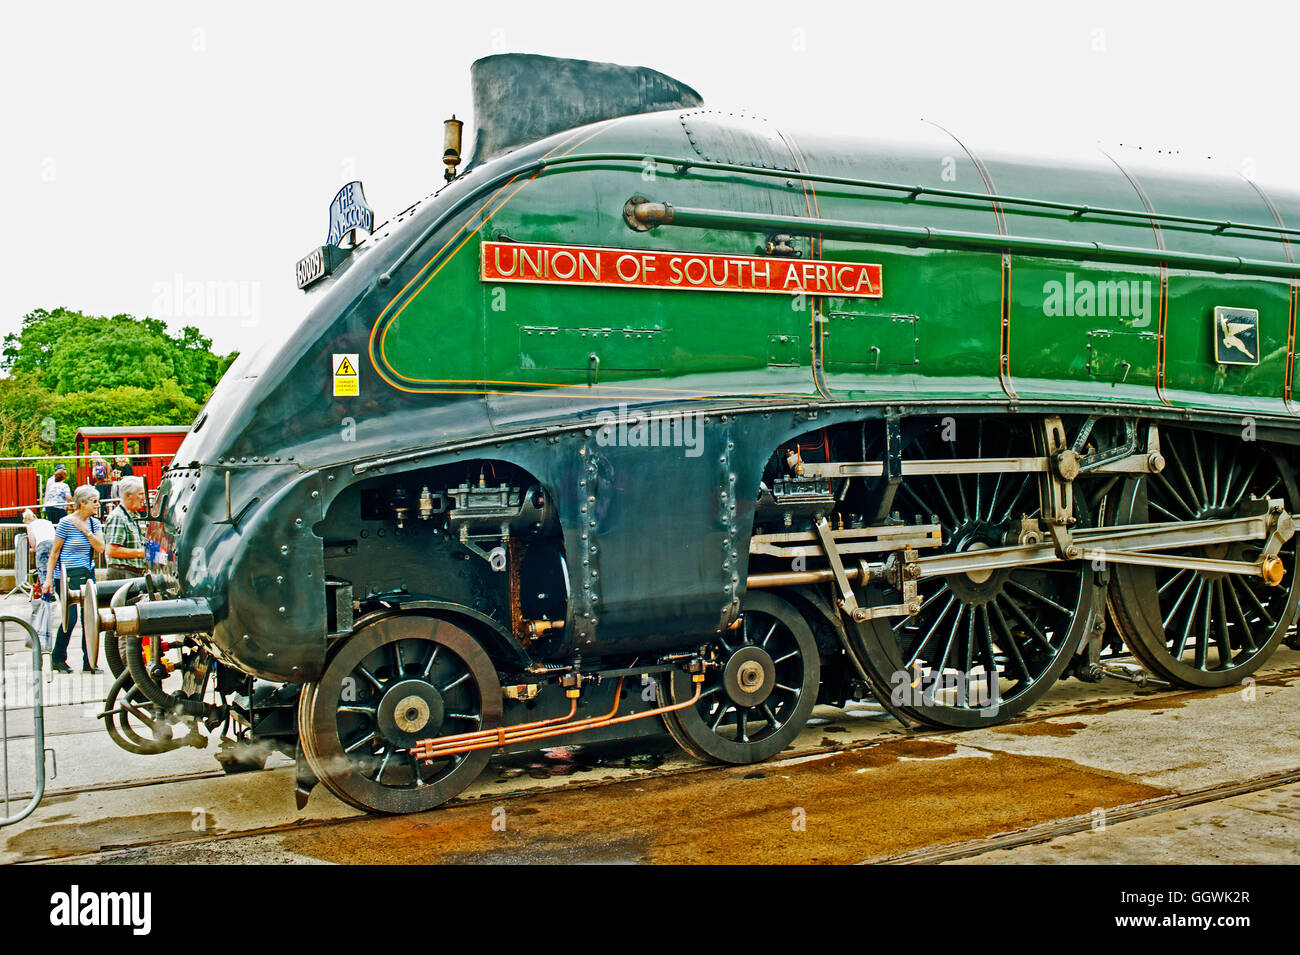 A4 Pacific No 60009 Union of South Africa at locomotion railway museum, Shildon Stock Photo